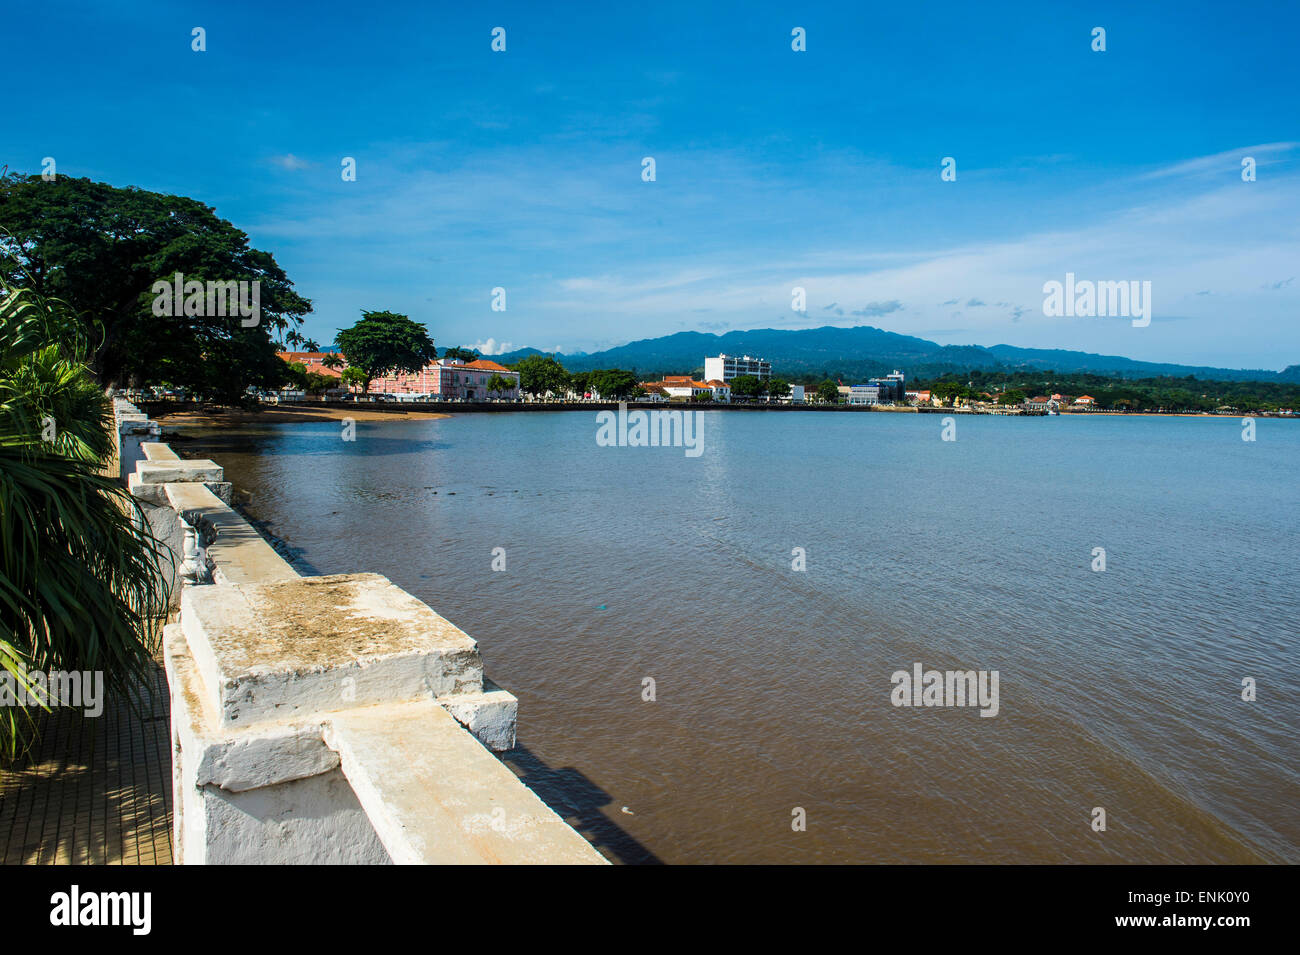 View over the bay of the City of Sao Tome, Sao Tome and Principe, Atlantic Ocean, Africa Stock Photo